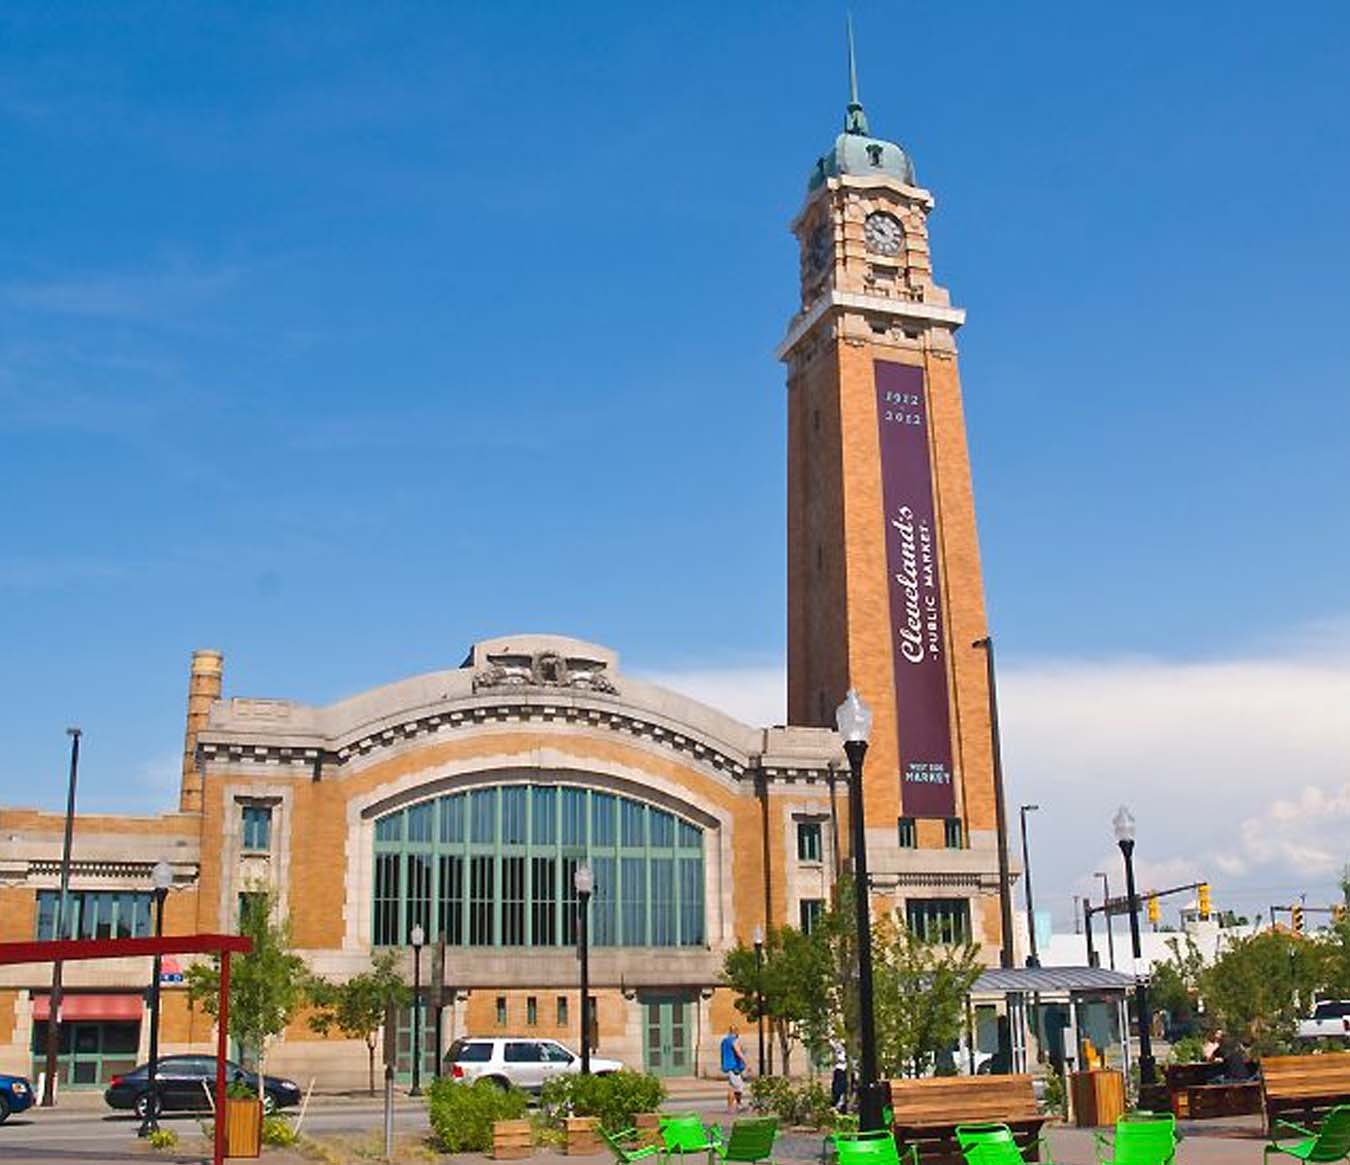 Things to Do in Cleveland - West Side Market